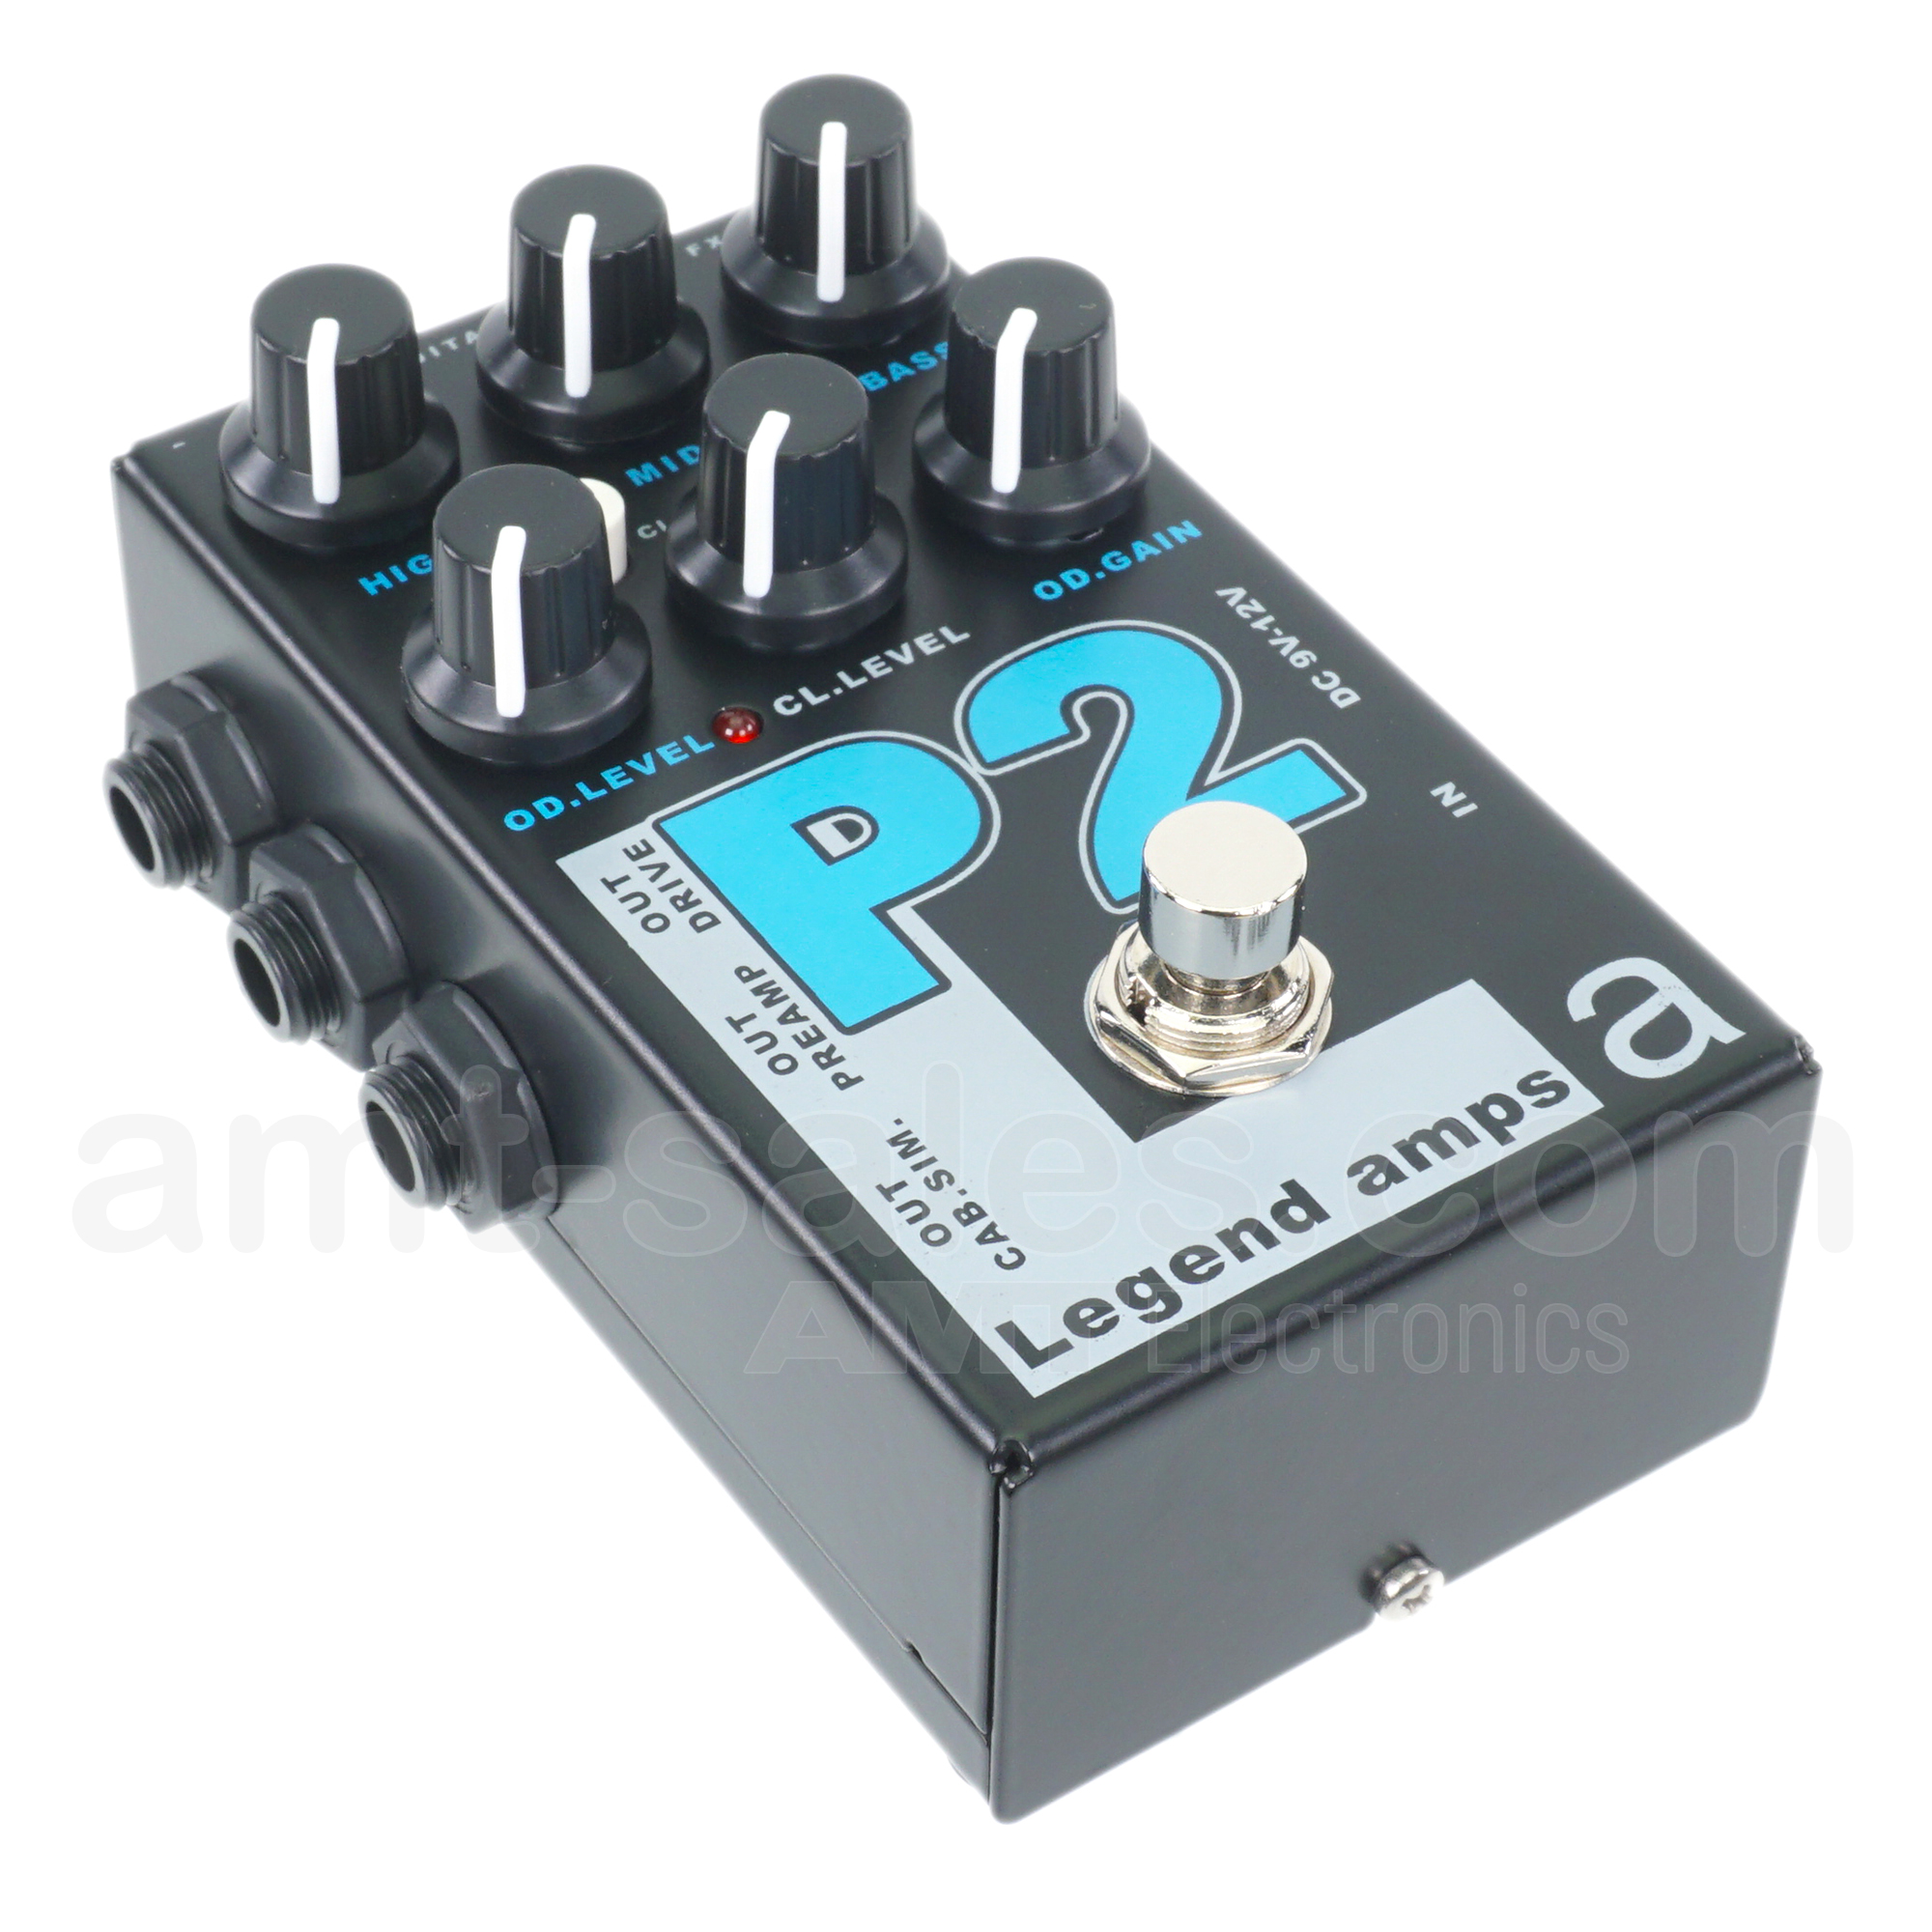 AMT P2 - 2 channels guitar preamp/distortion pedal (Peavey)